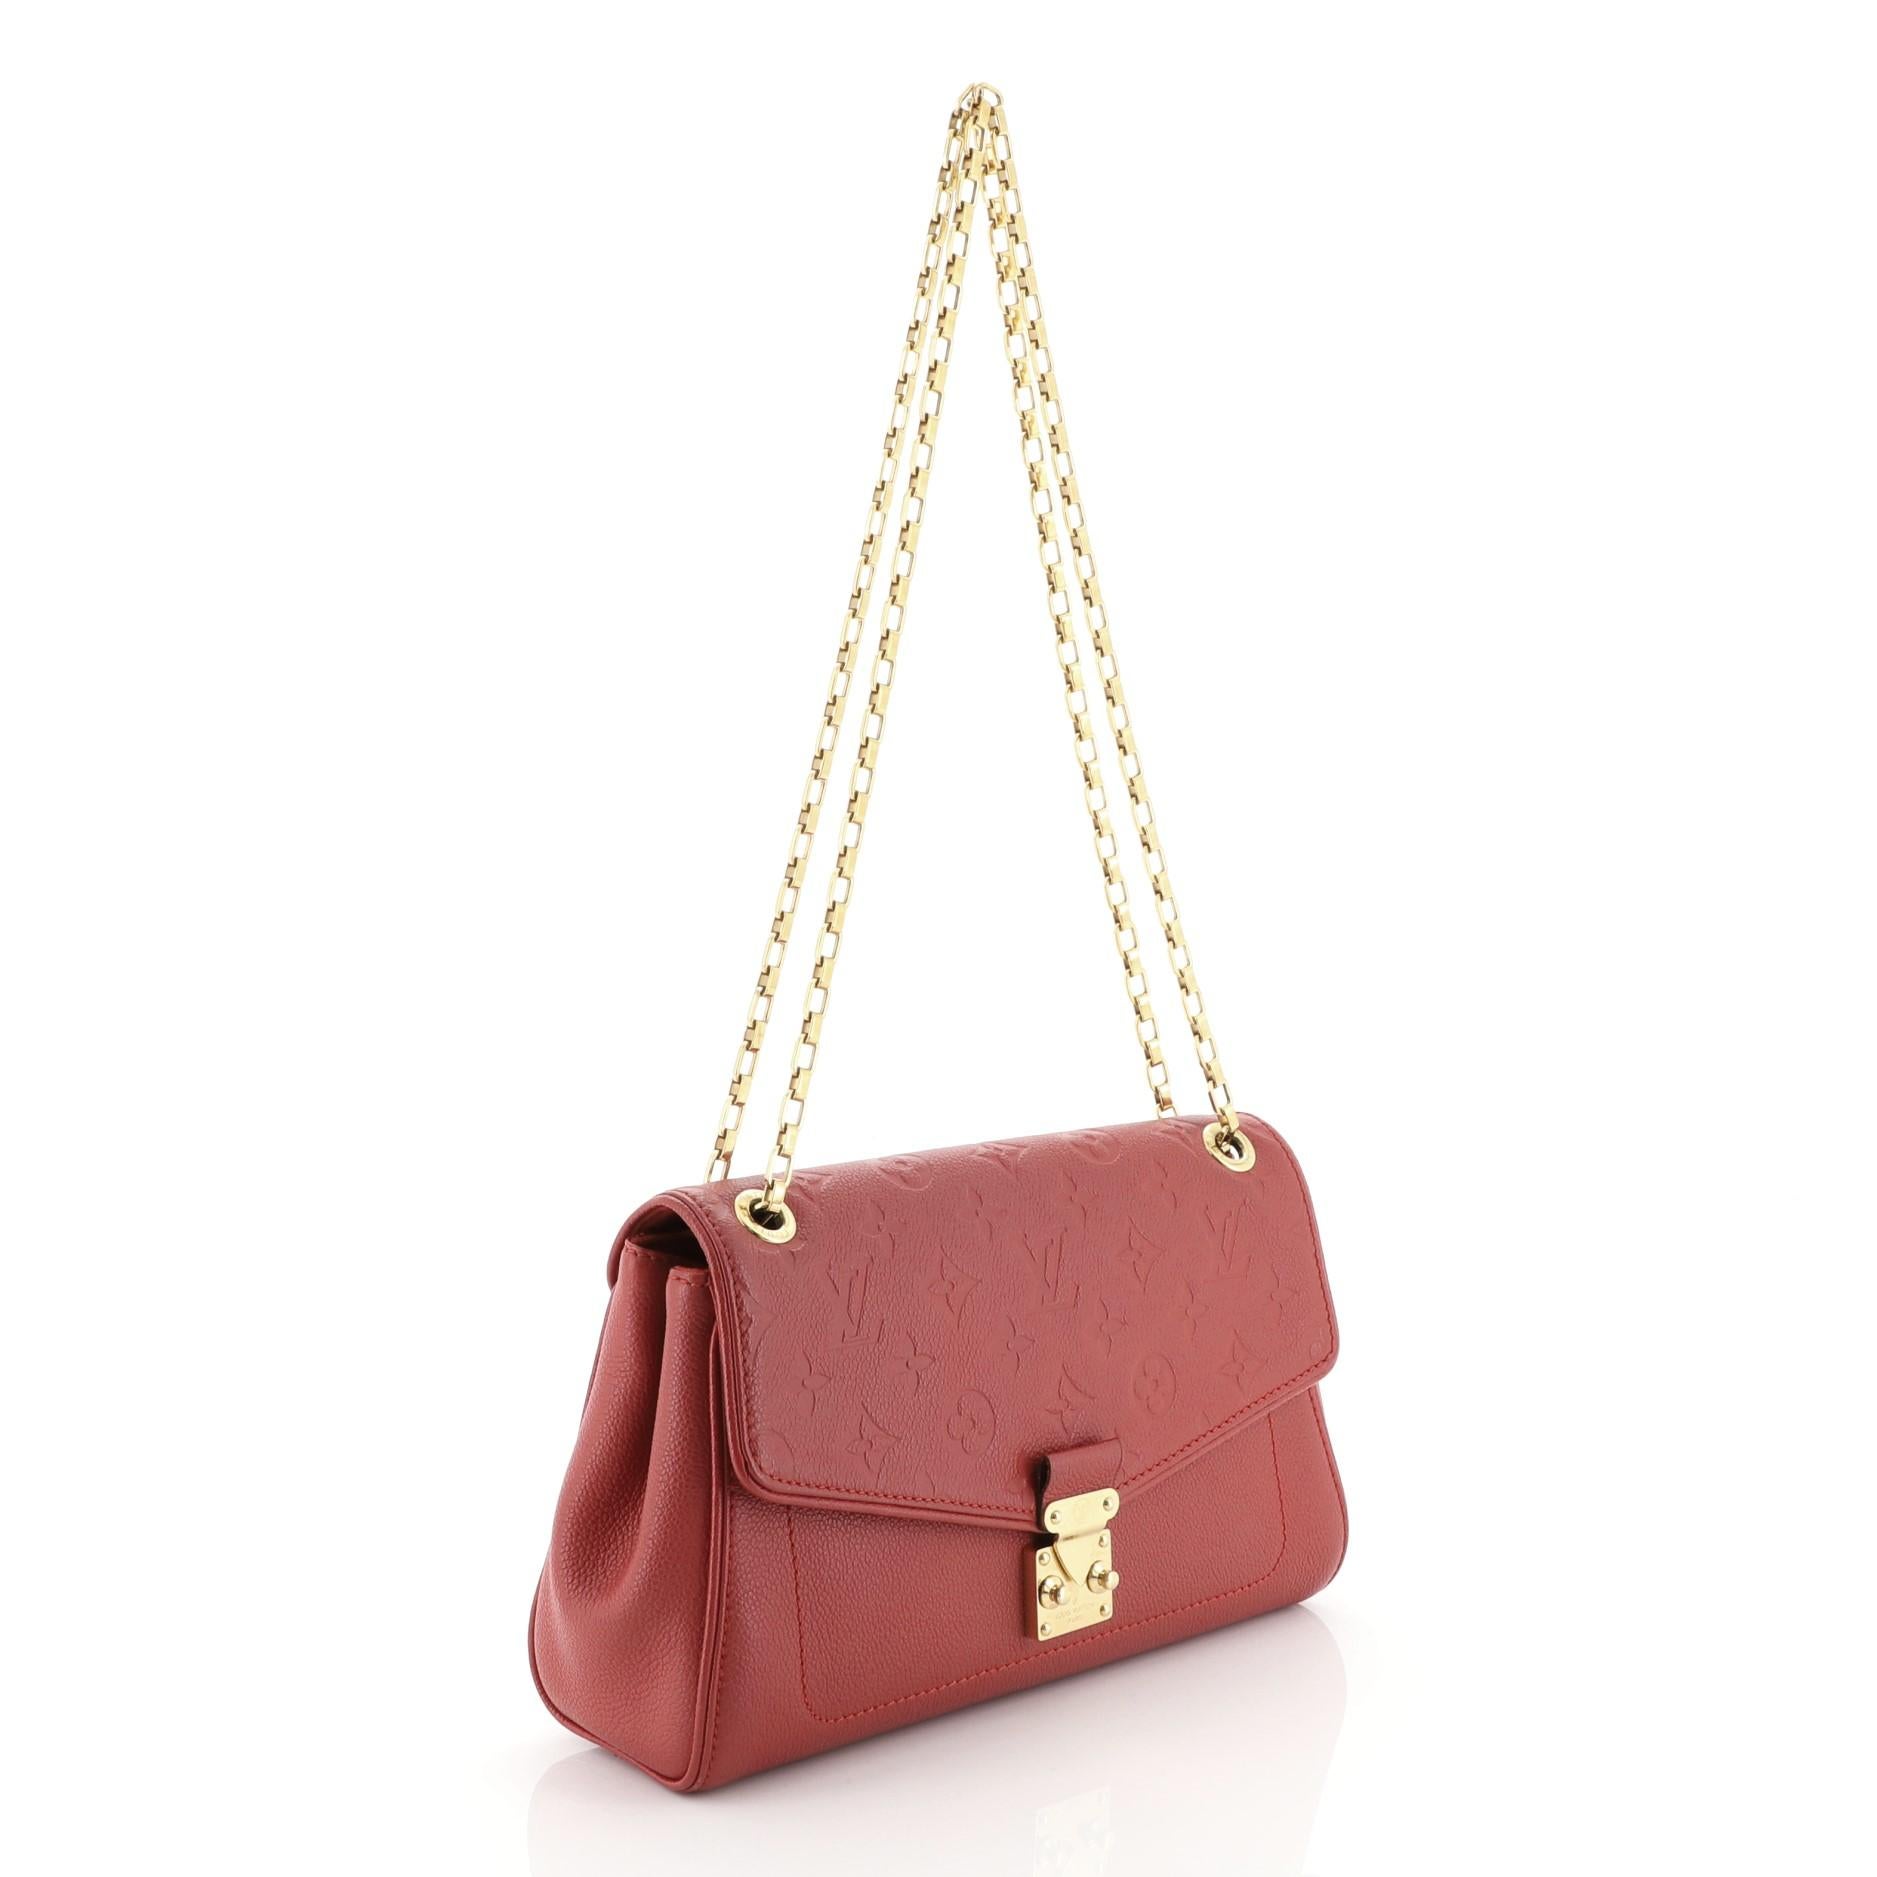 This Louis Vuitton Saint Germain Handbag Monogram Empreinte Leather PM, crafted from red monogram empreinte leather, features chain link shoulder strap and gold-tone hardware. Its S-lock closure opens to a red microfiber interior with zip pocket.